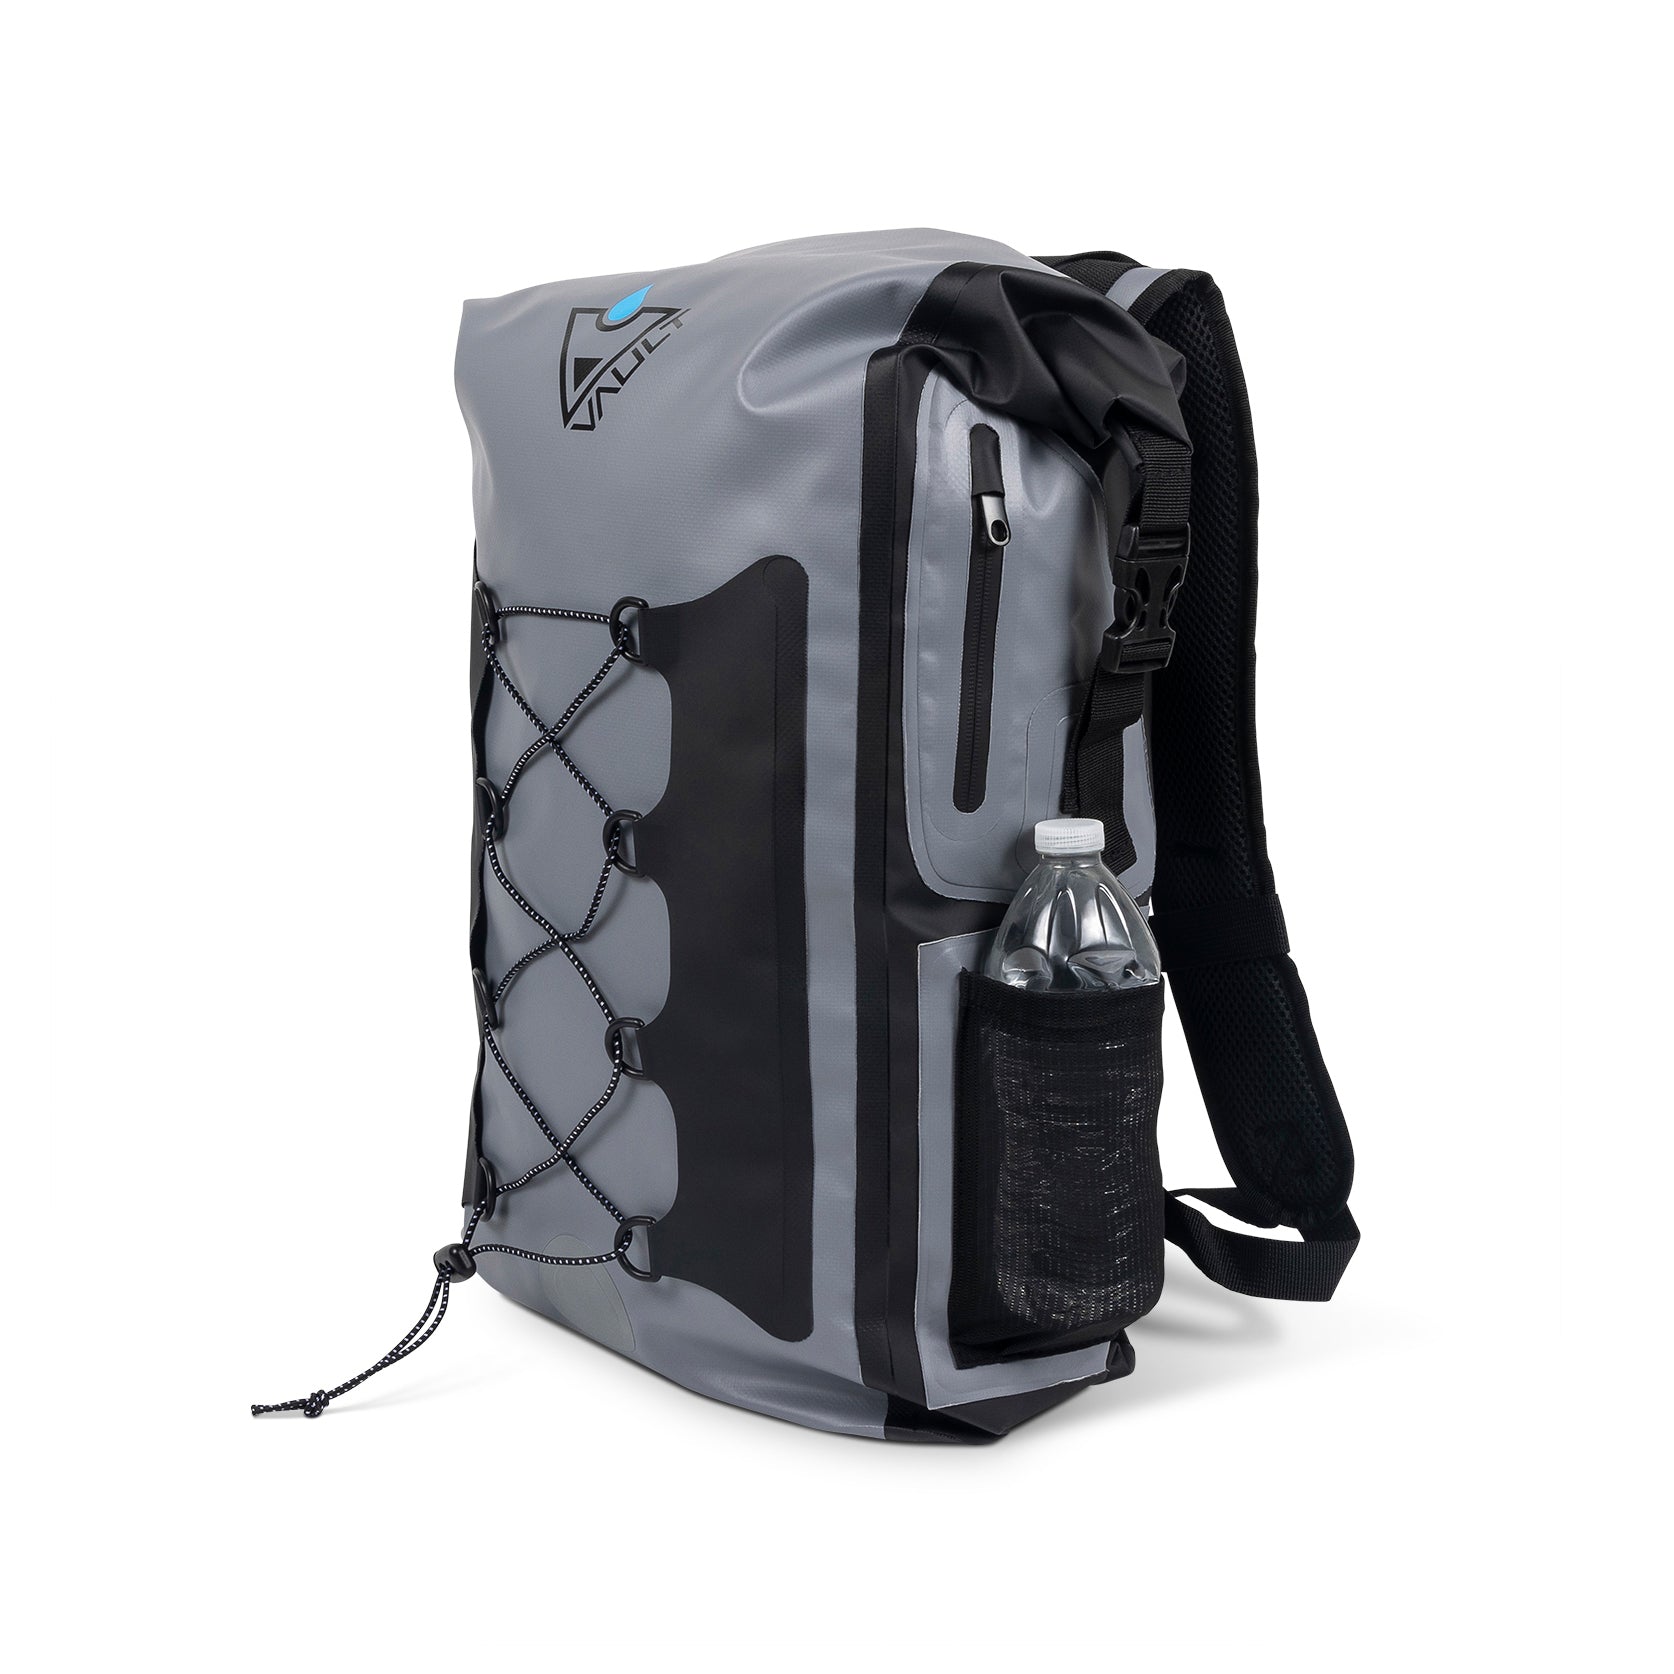 Runners world best waterproof backpack for running, walking, hiking, riding, and commuting